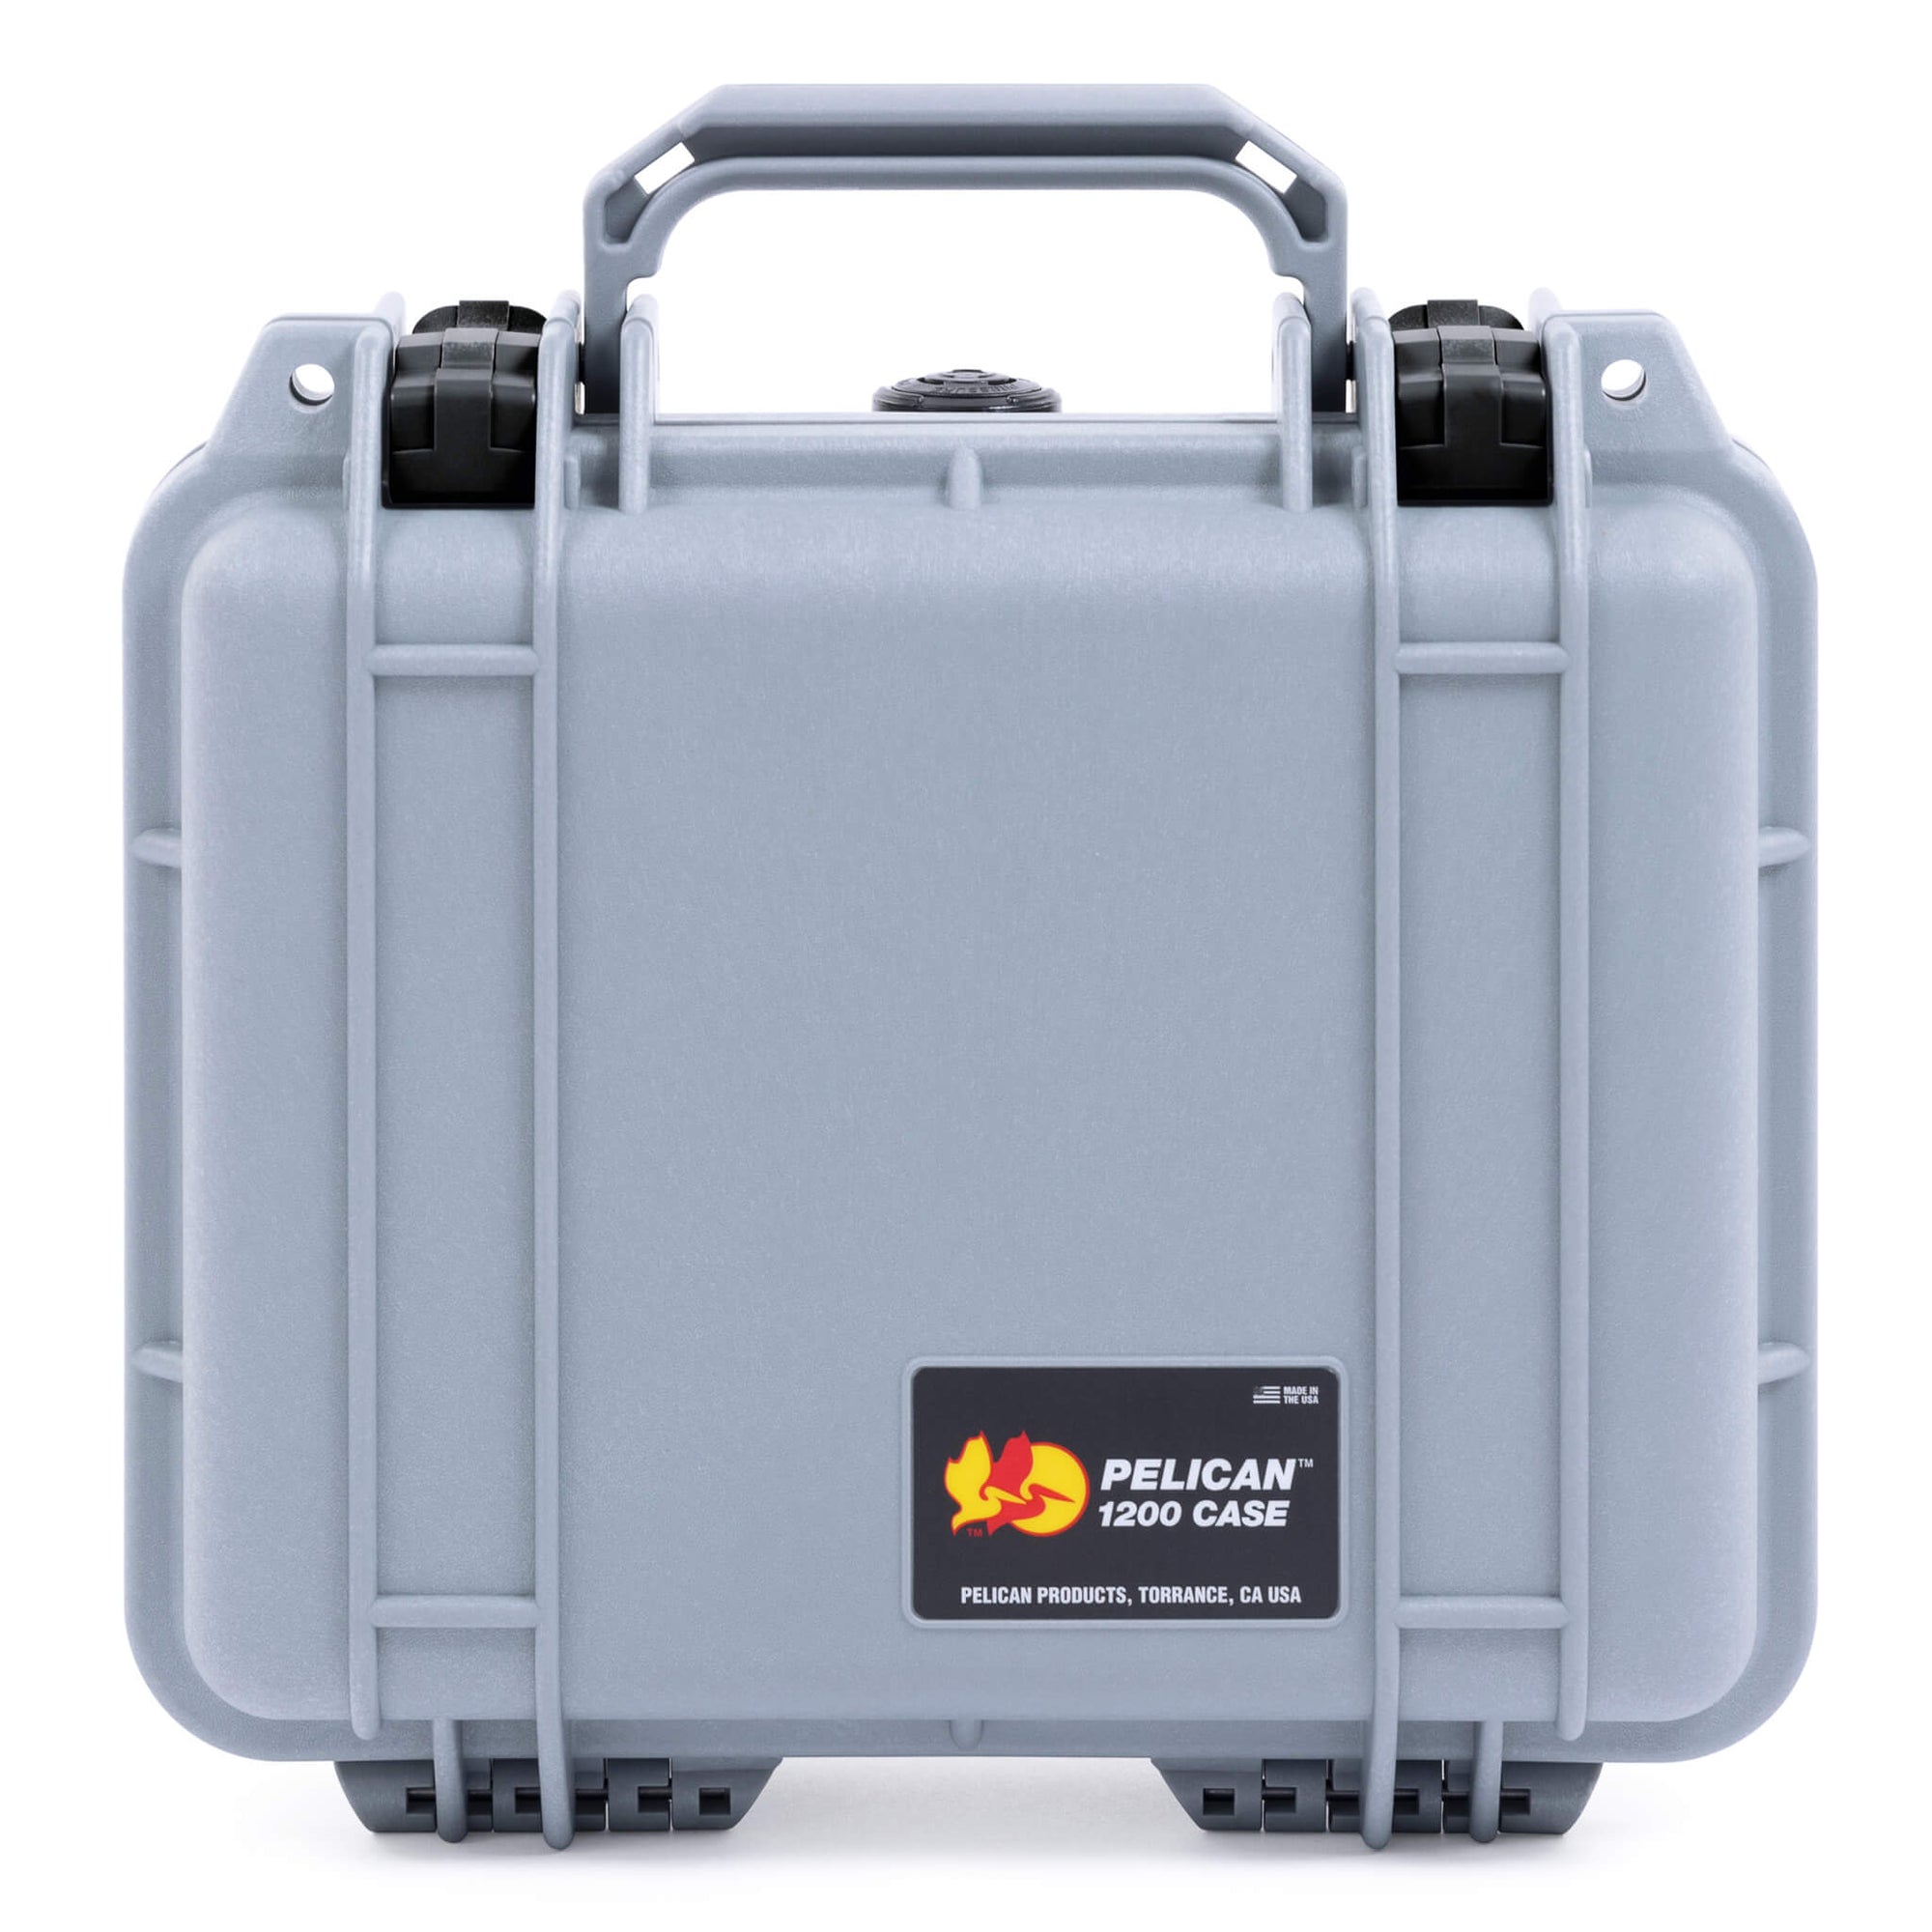 Pelican 1200 Case, Silver with Black Latches ColorCase 